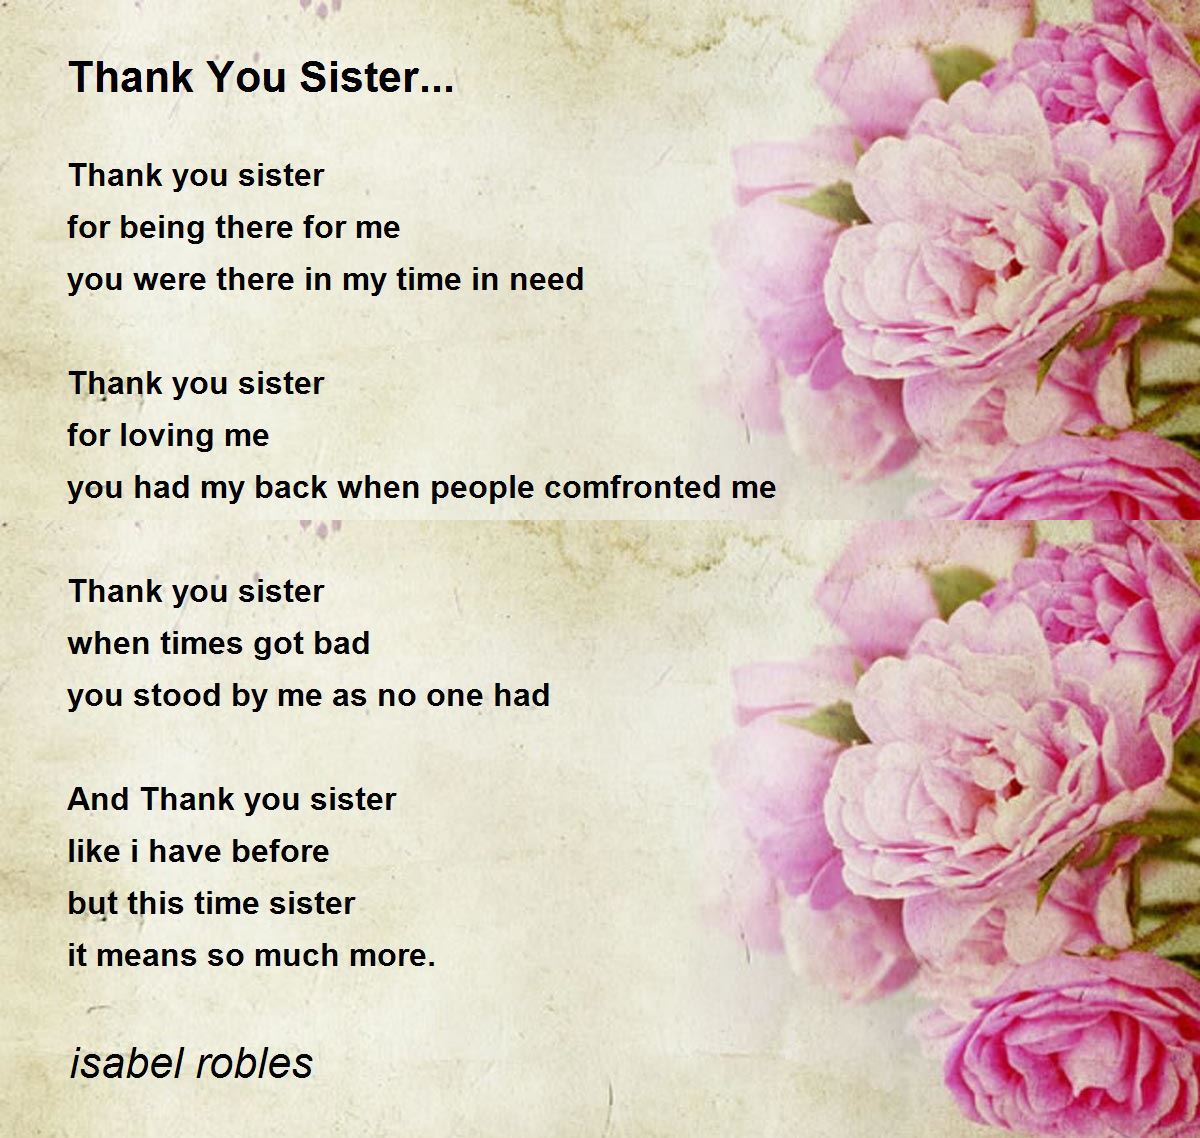 Thank You Sister... Poem by isabel robles - Poem Hunter Comments